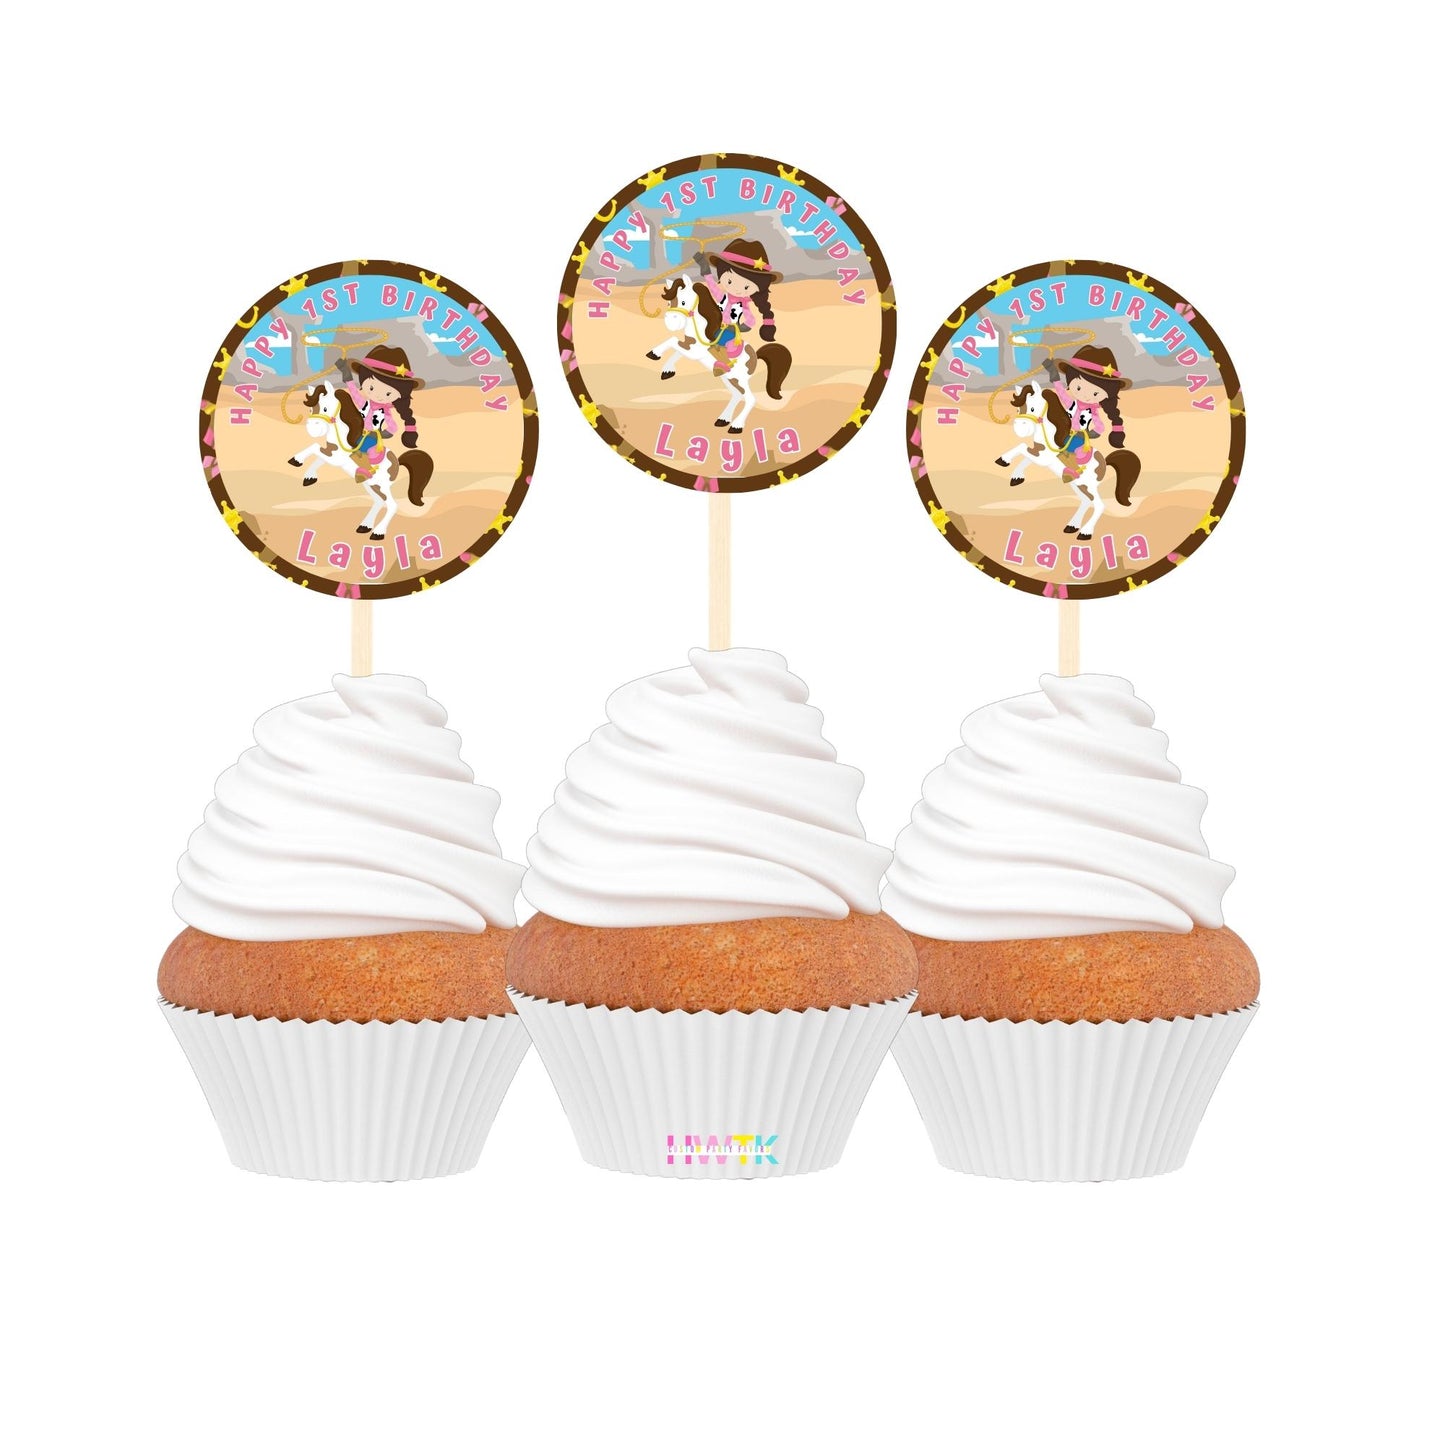 Cowgirl Birthday Party Personalized 2” round Cupcake Toppers 12pc